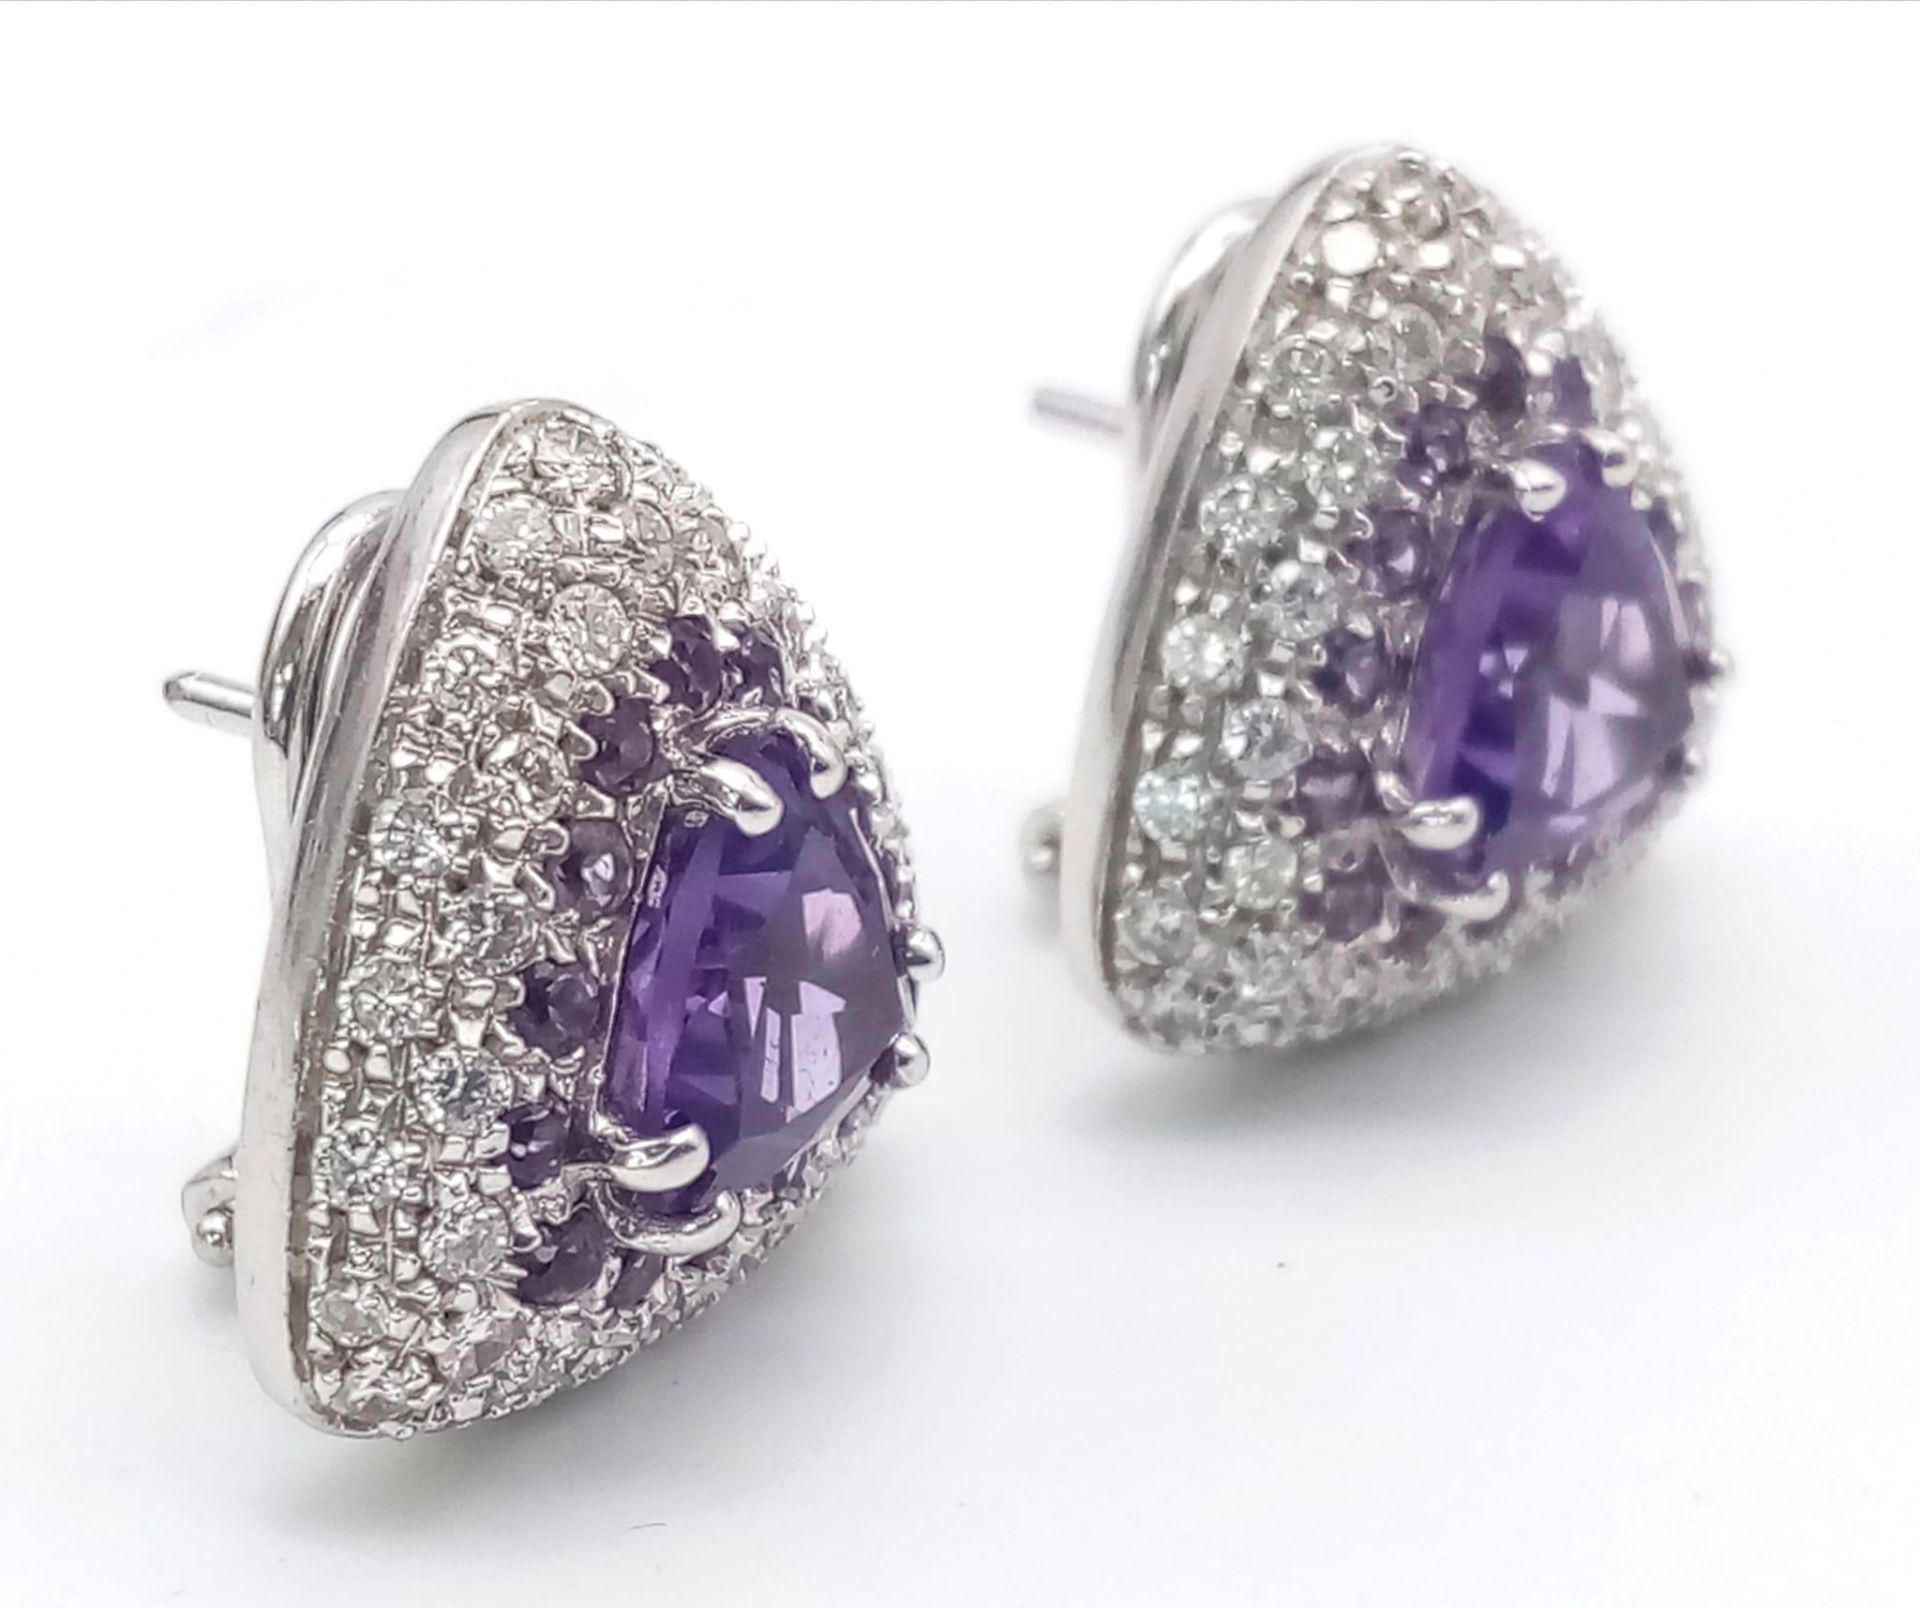 A FABULOUS 18K WHITE GOLD DIAMOND AND AMETHYST RING WITH MATCHING EARRINGS . 35.5gms - Image 9 of 12